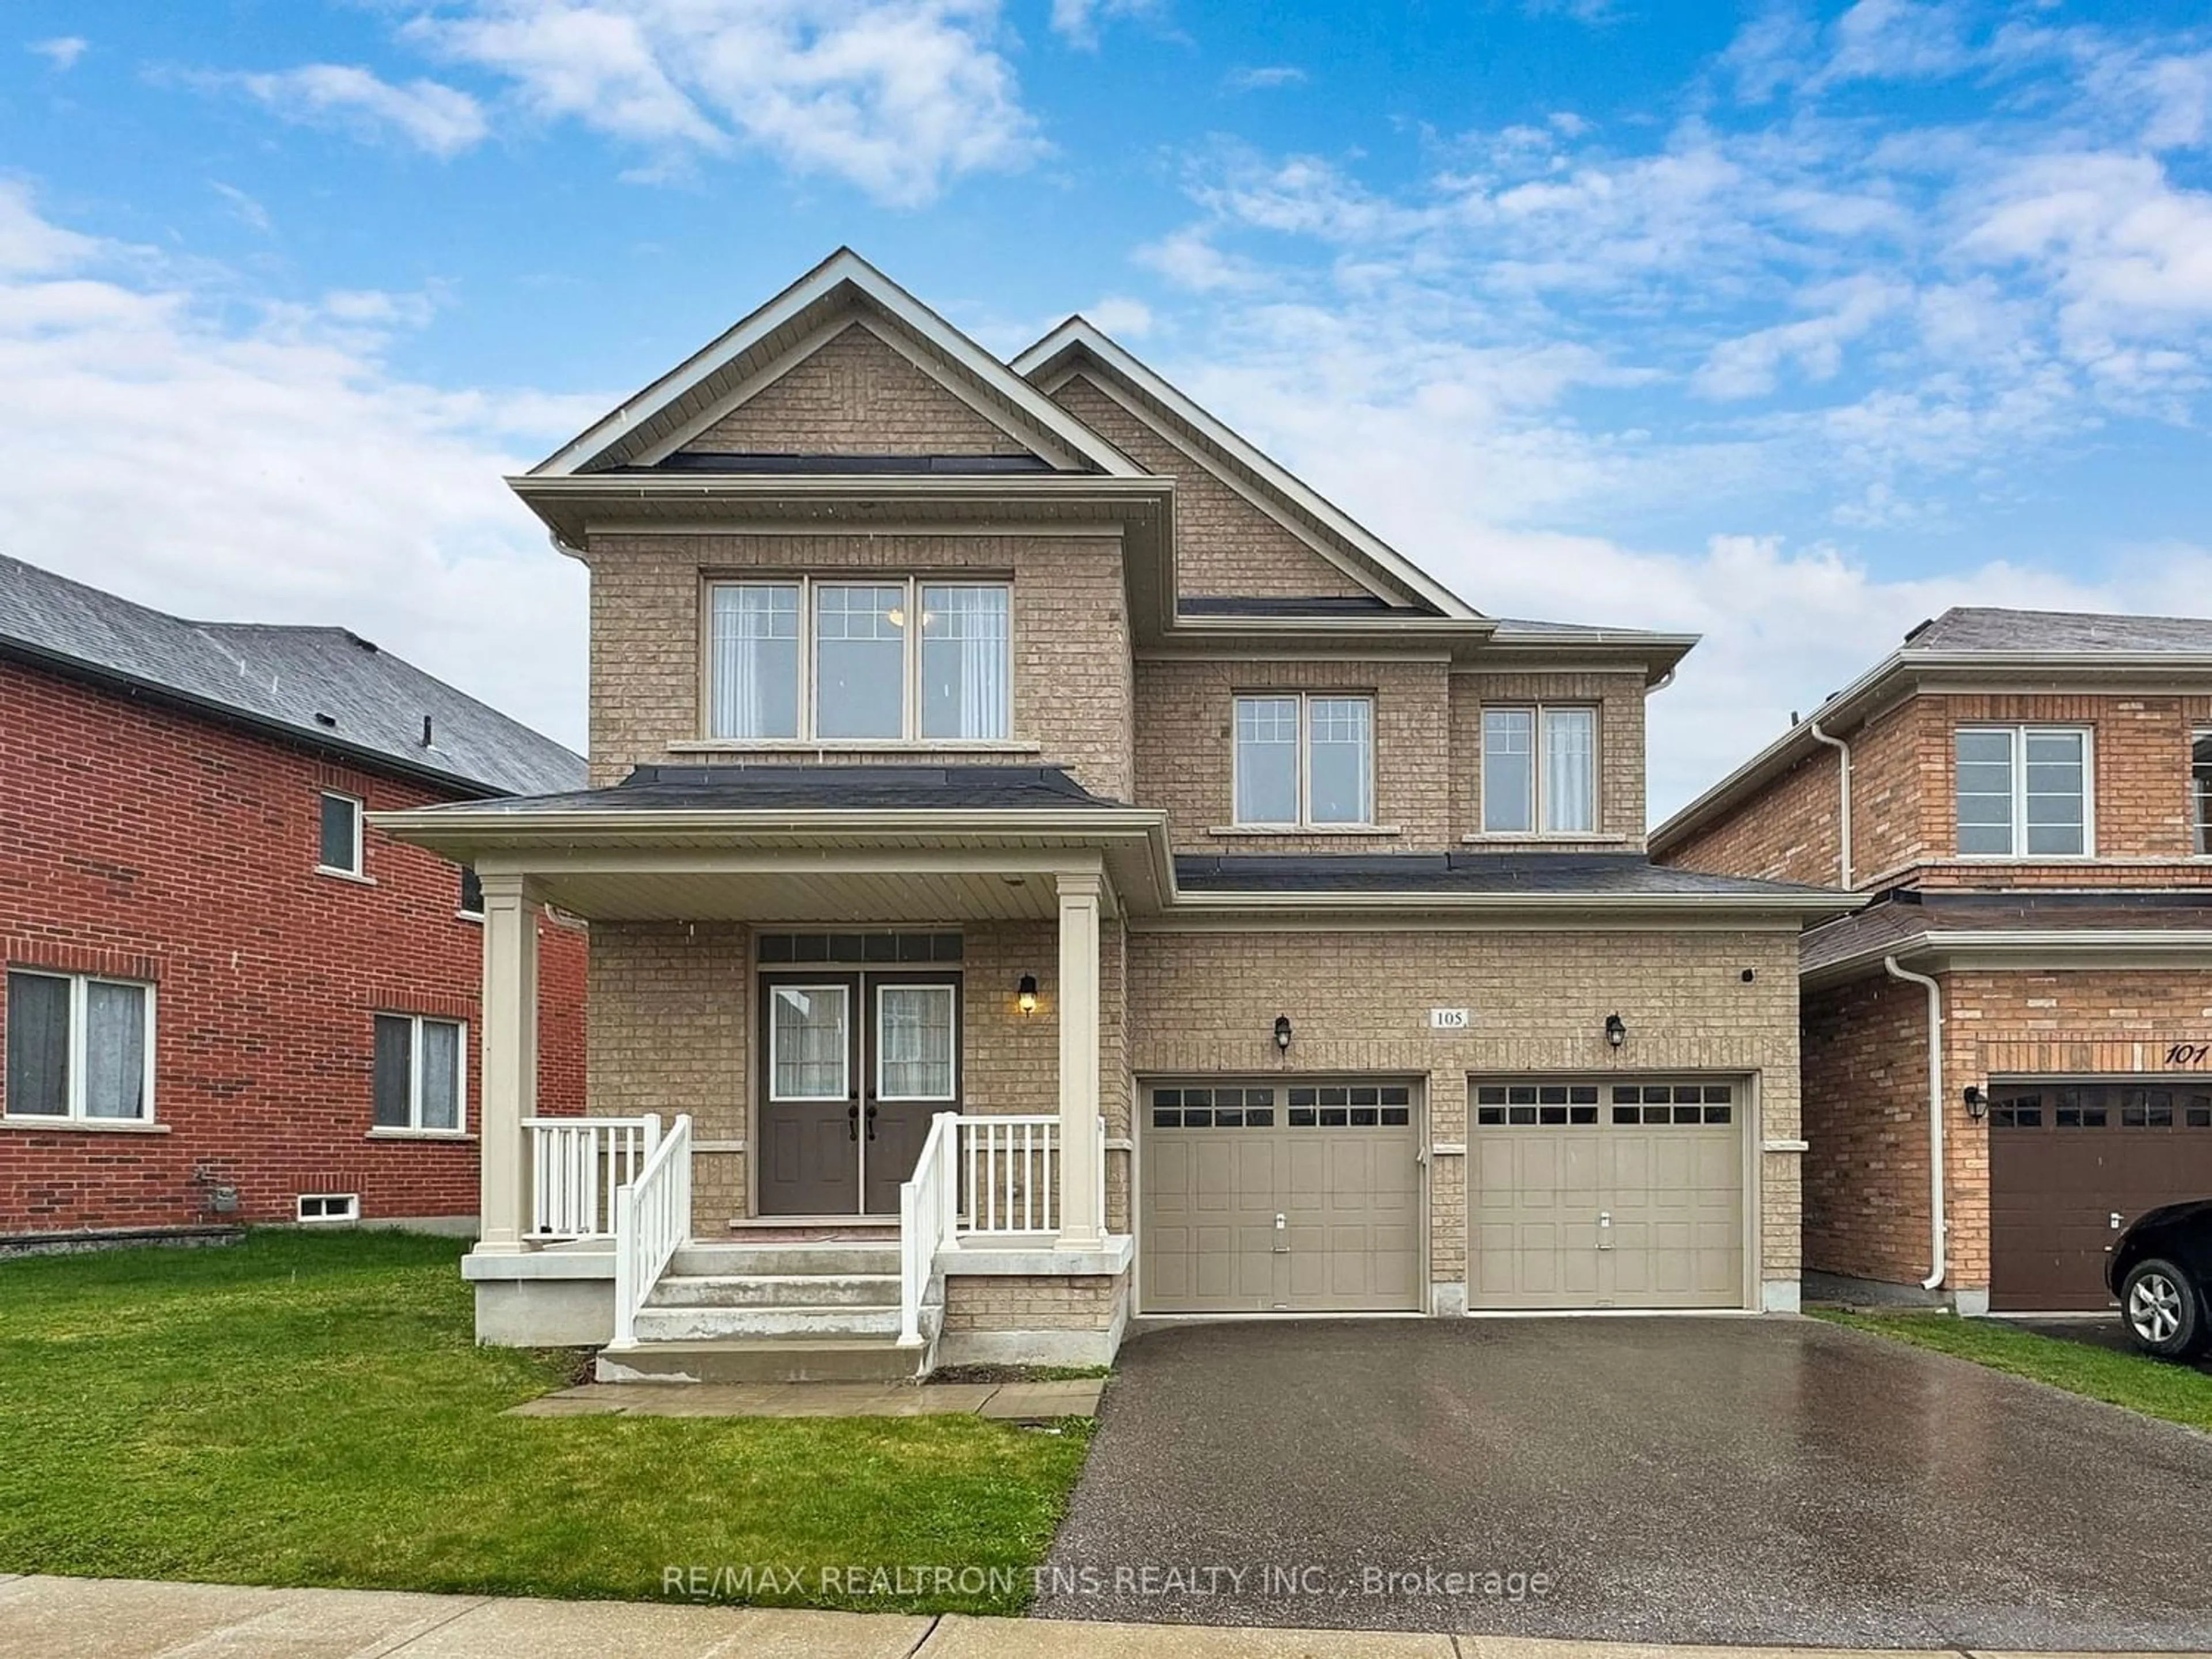 Home with brick exterior material for 105 Roy Harper Ave, Aurora Ontario L4G 0V5